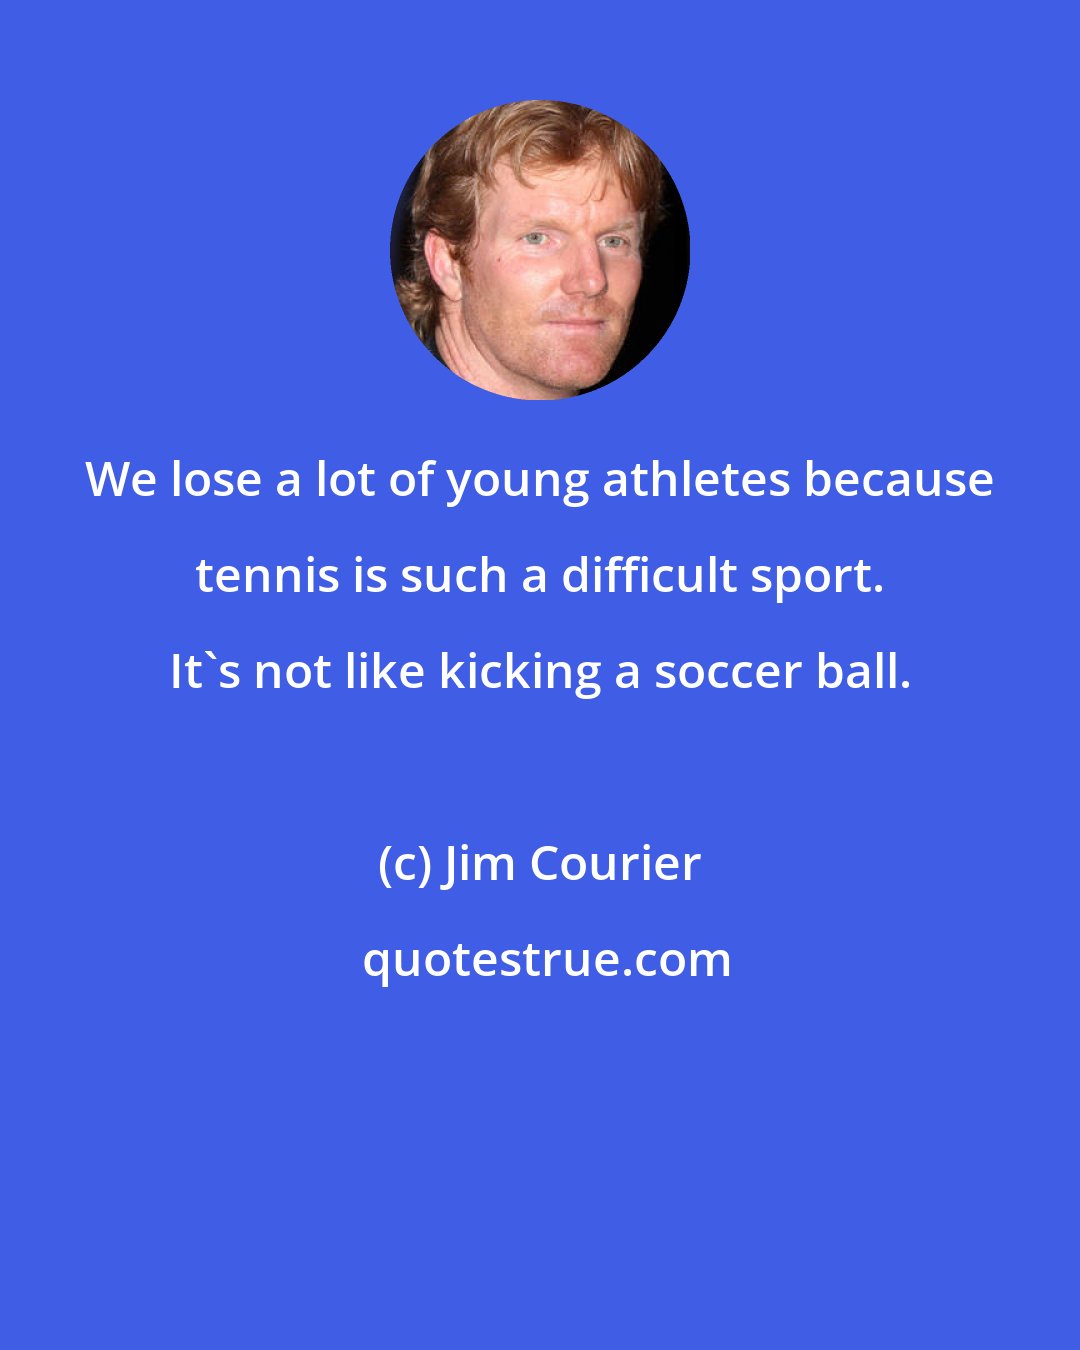 Jim Courier: We lose a lot of young athletes because tennis is such a difficult sport. It's not like kicking a soccer ball.